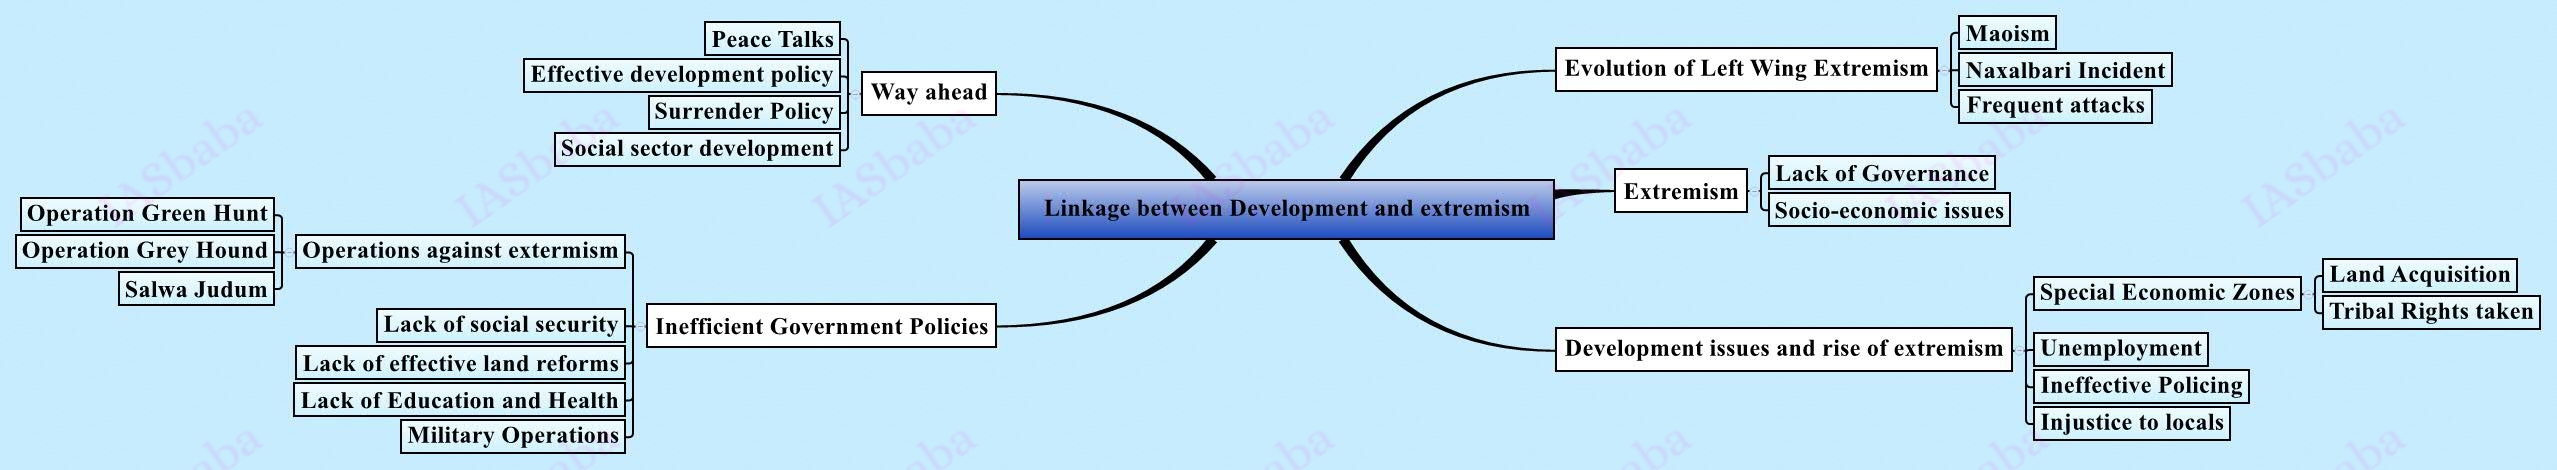 Linkage-between-Development-and-extremism